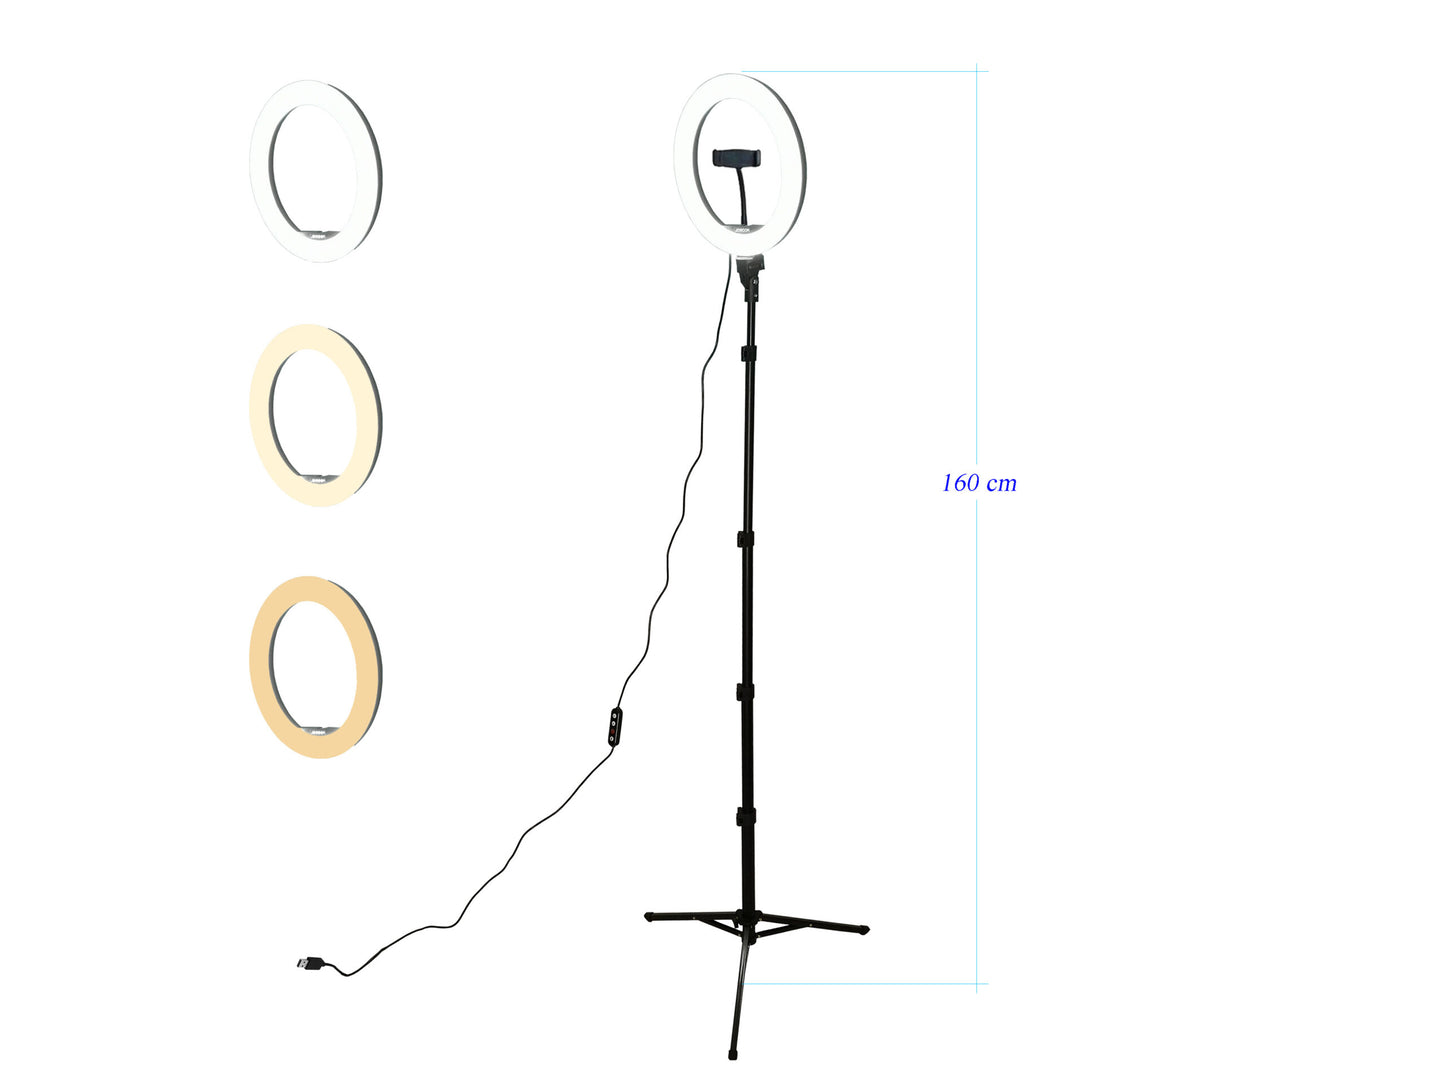 10" Selfie LED Ring Light with Extendable Tripod Stand